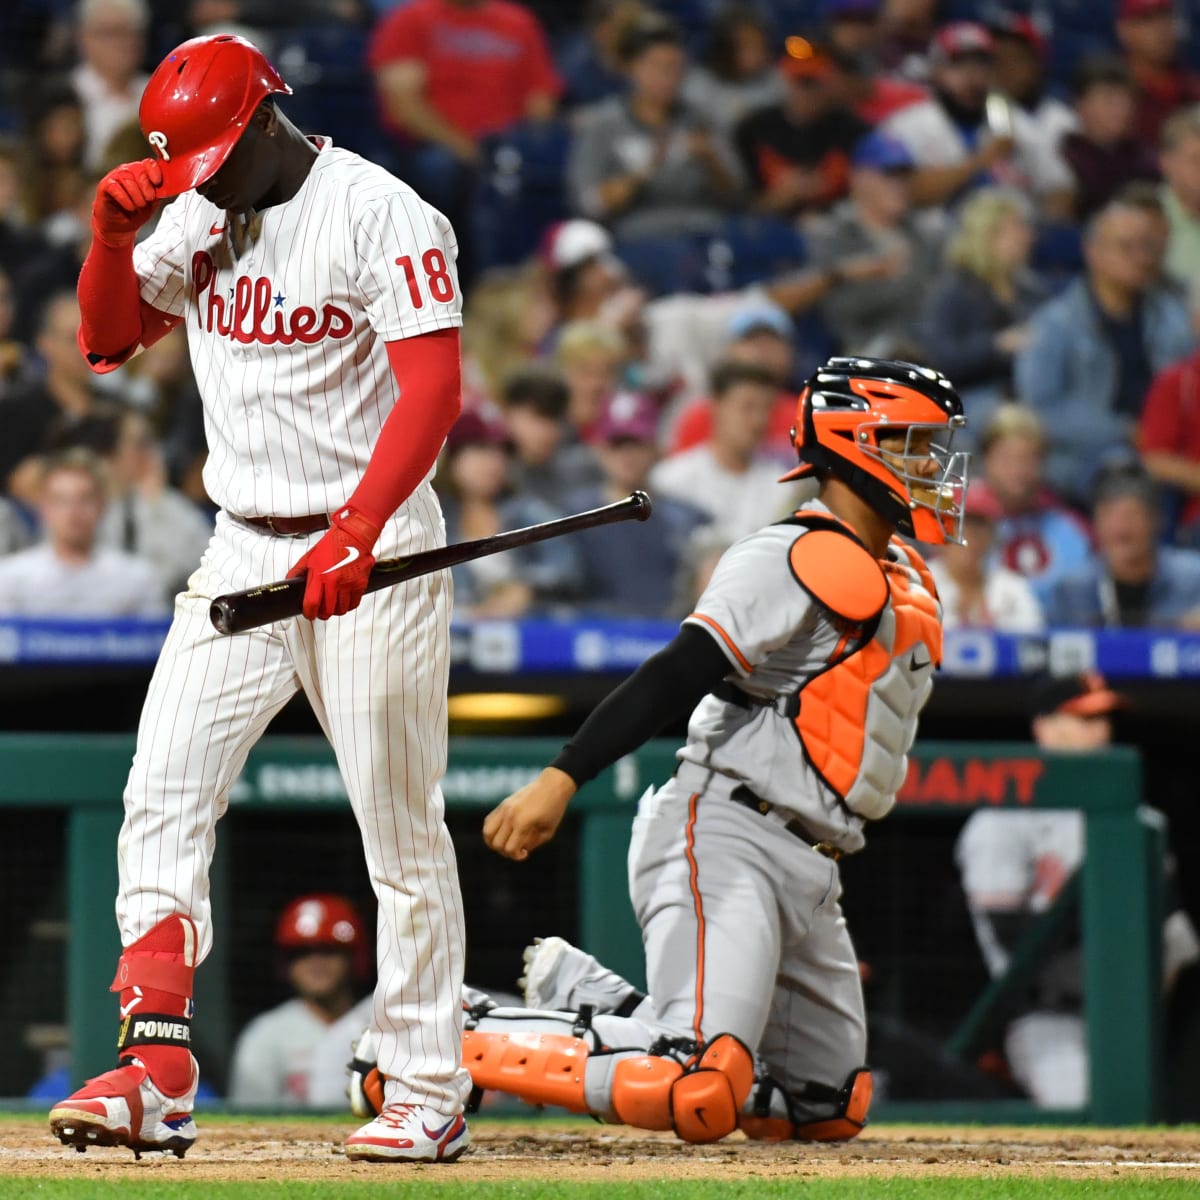 Phillies get shut out, lose 7th in a row